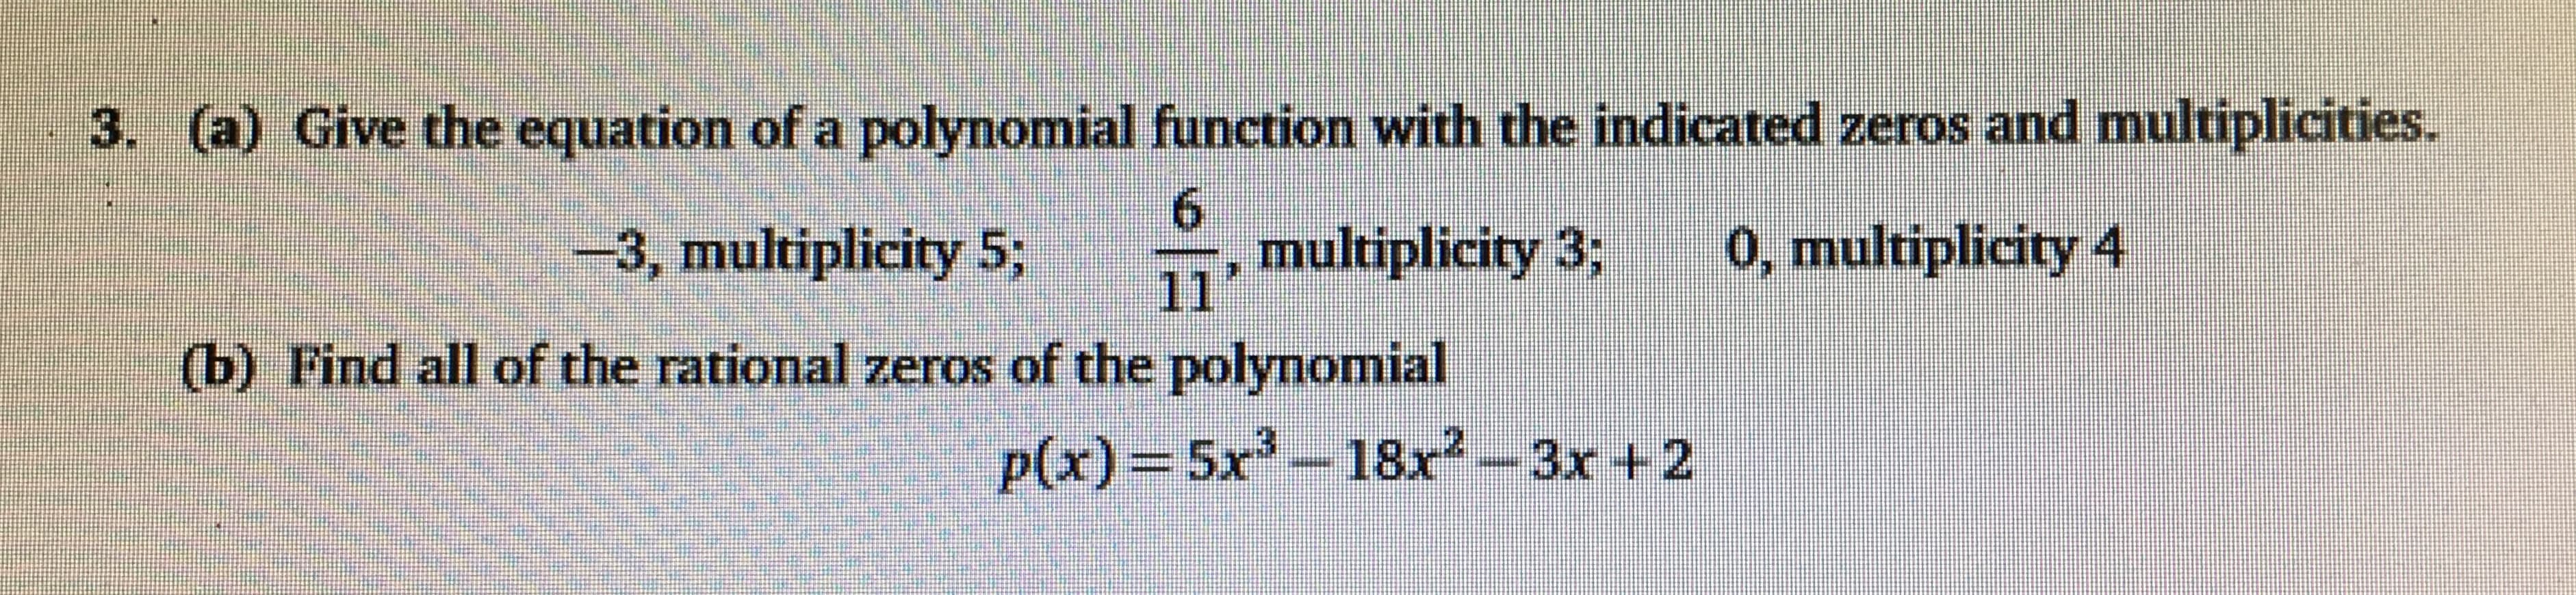 3. (a) Give the equation of a polynomial function with the indicated zeros and multiplicities.
6
multiplicity 3;
0, multiplicity 4
3, multiplicity 5;
111
(b) Find all of the rational zeros of the polynomial
p(x)=5x-18x2--3x +2
